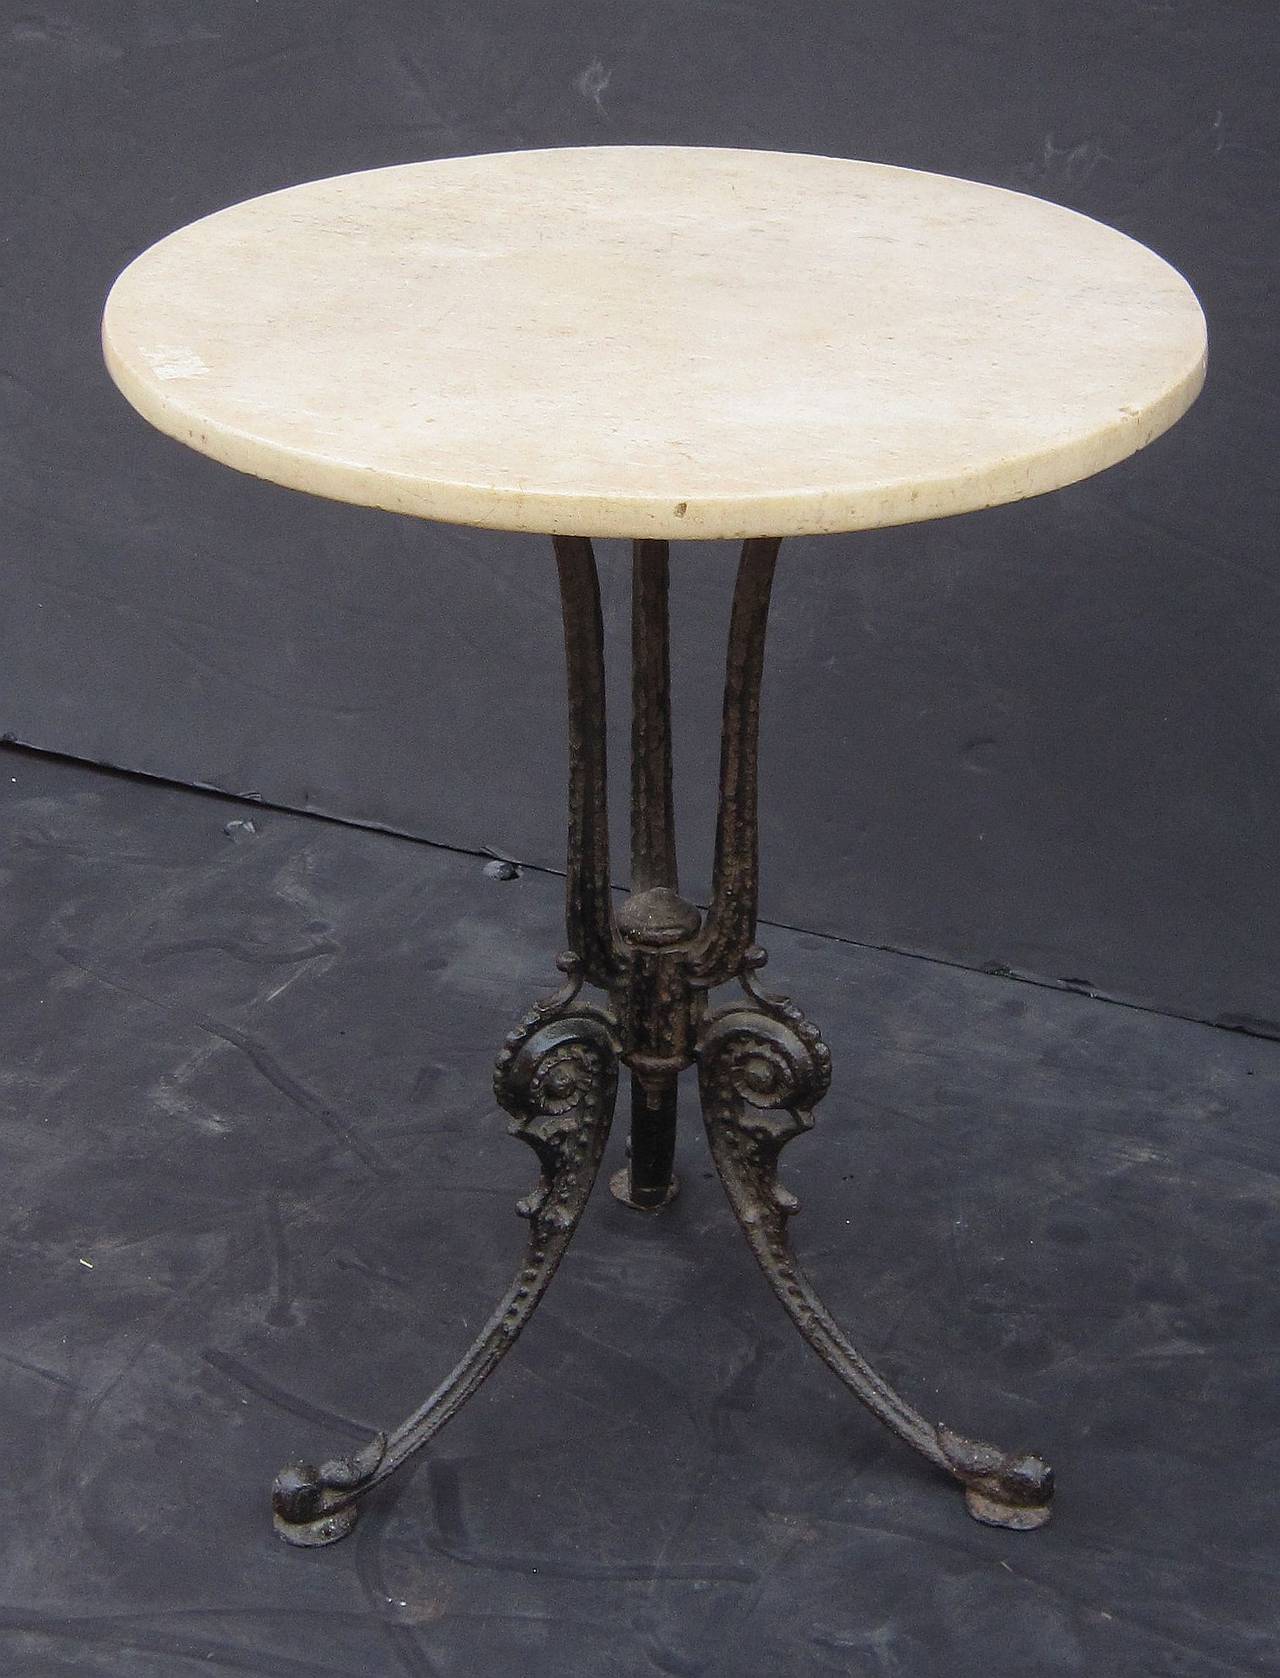 19th Century English Bistro Table with Marble Top (22 1/8